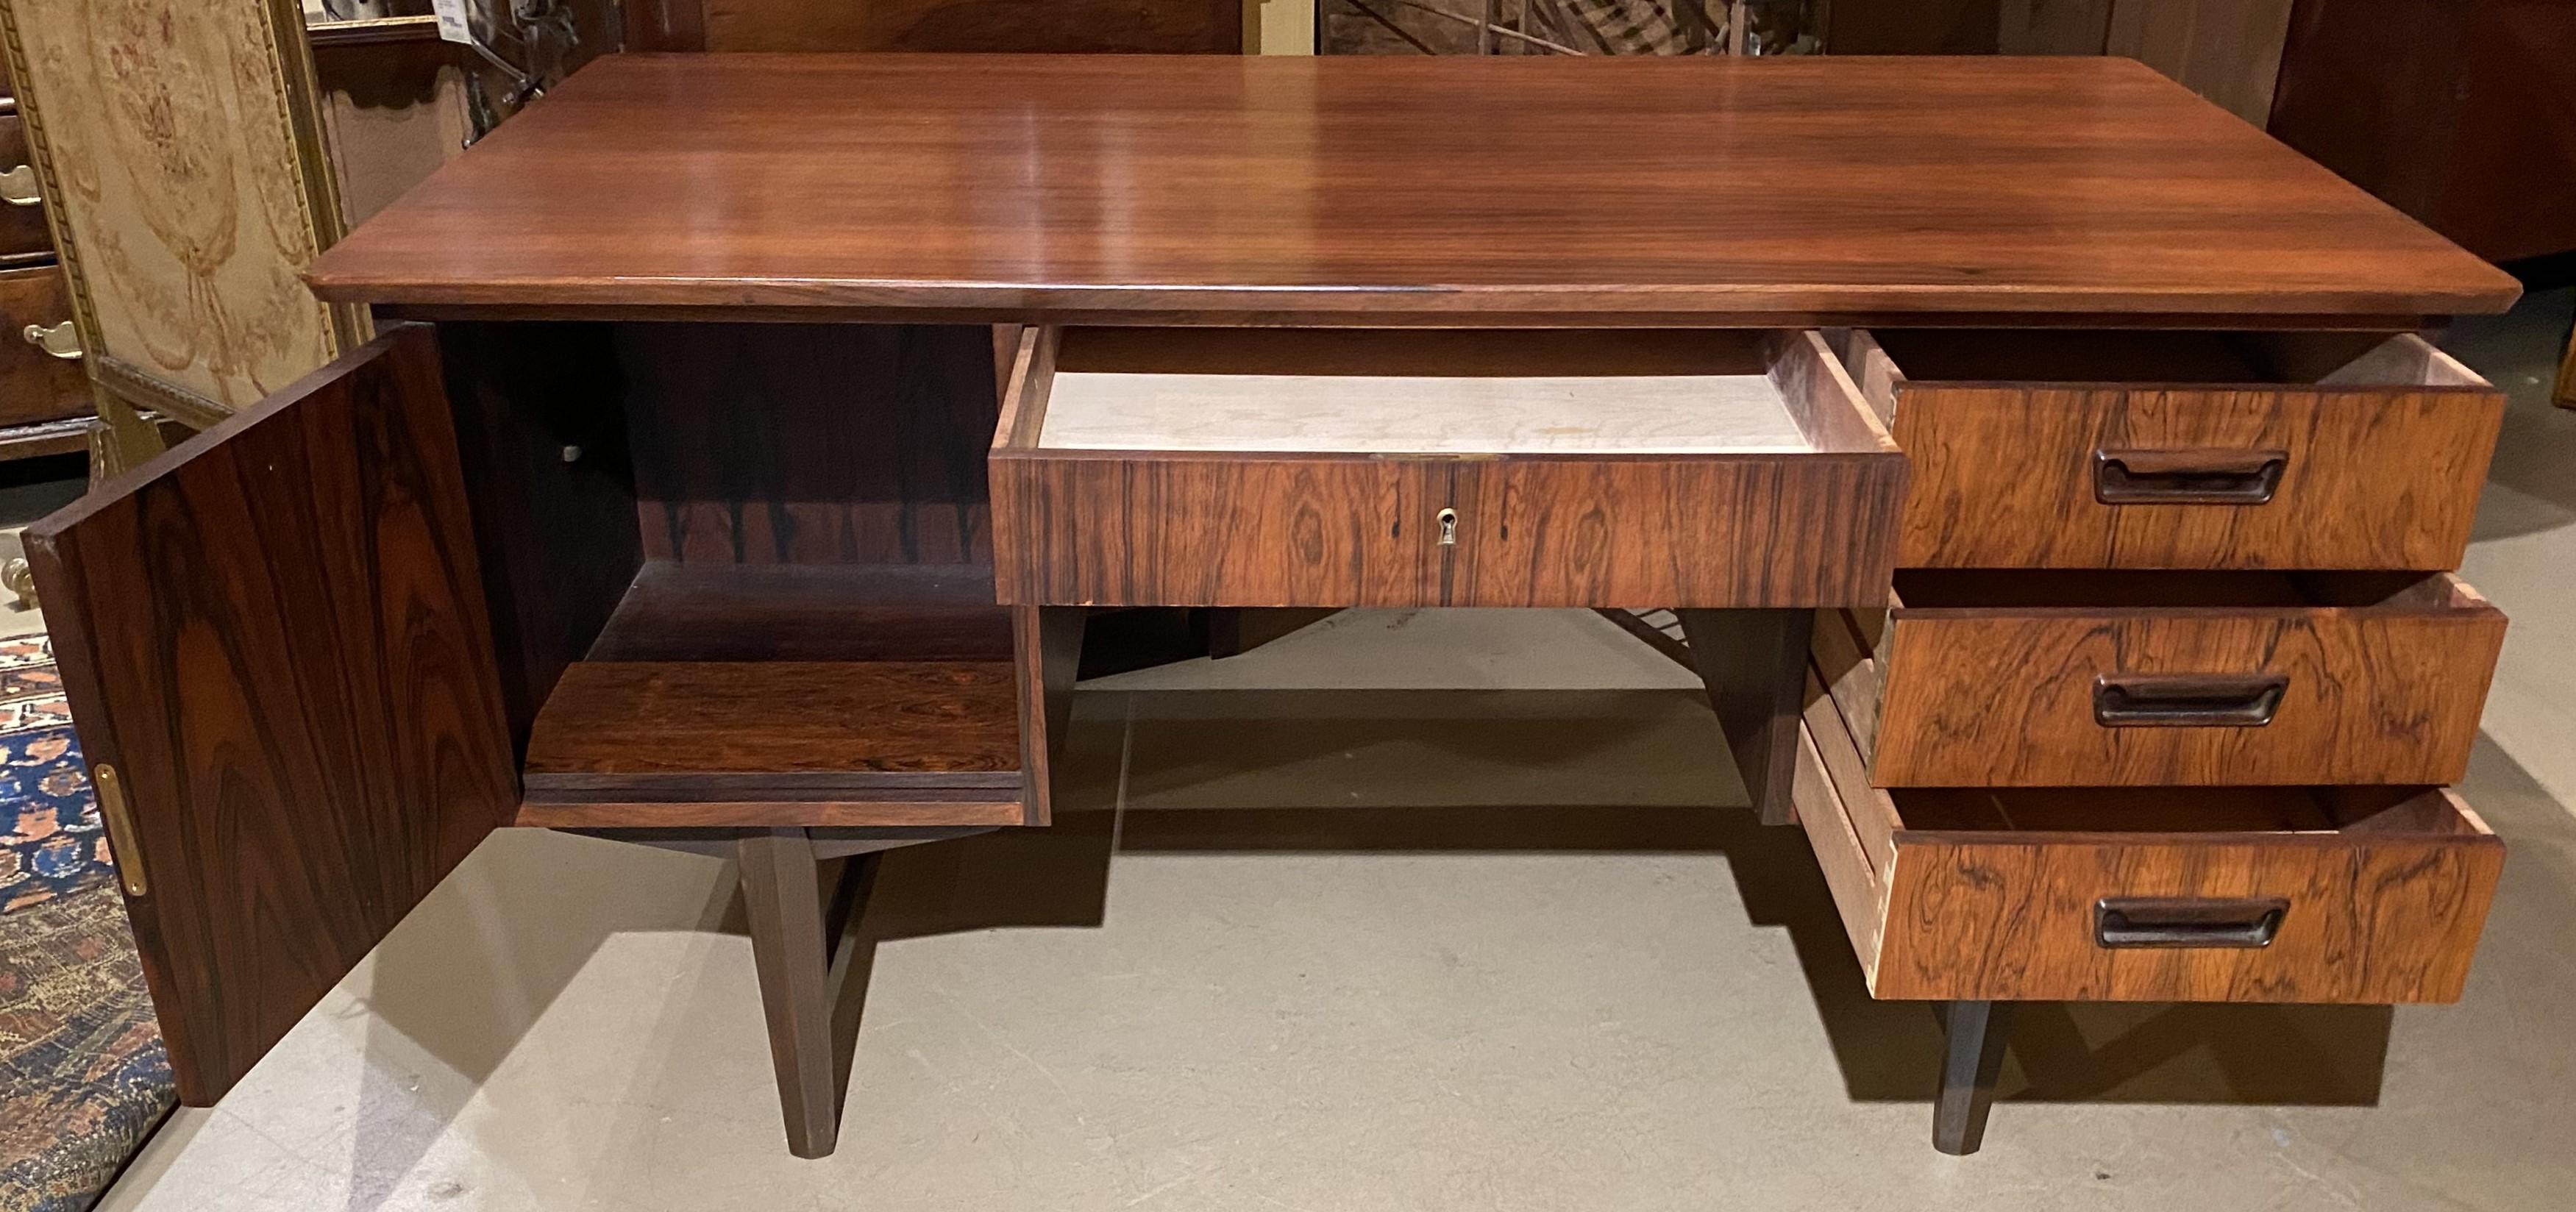 Rosewood Mid Century Modern Desk with Bookcase Front In Good Condition For Sale In Milford, NH